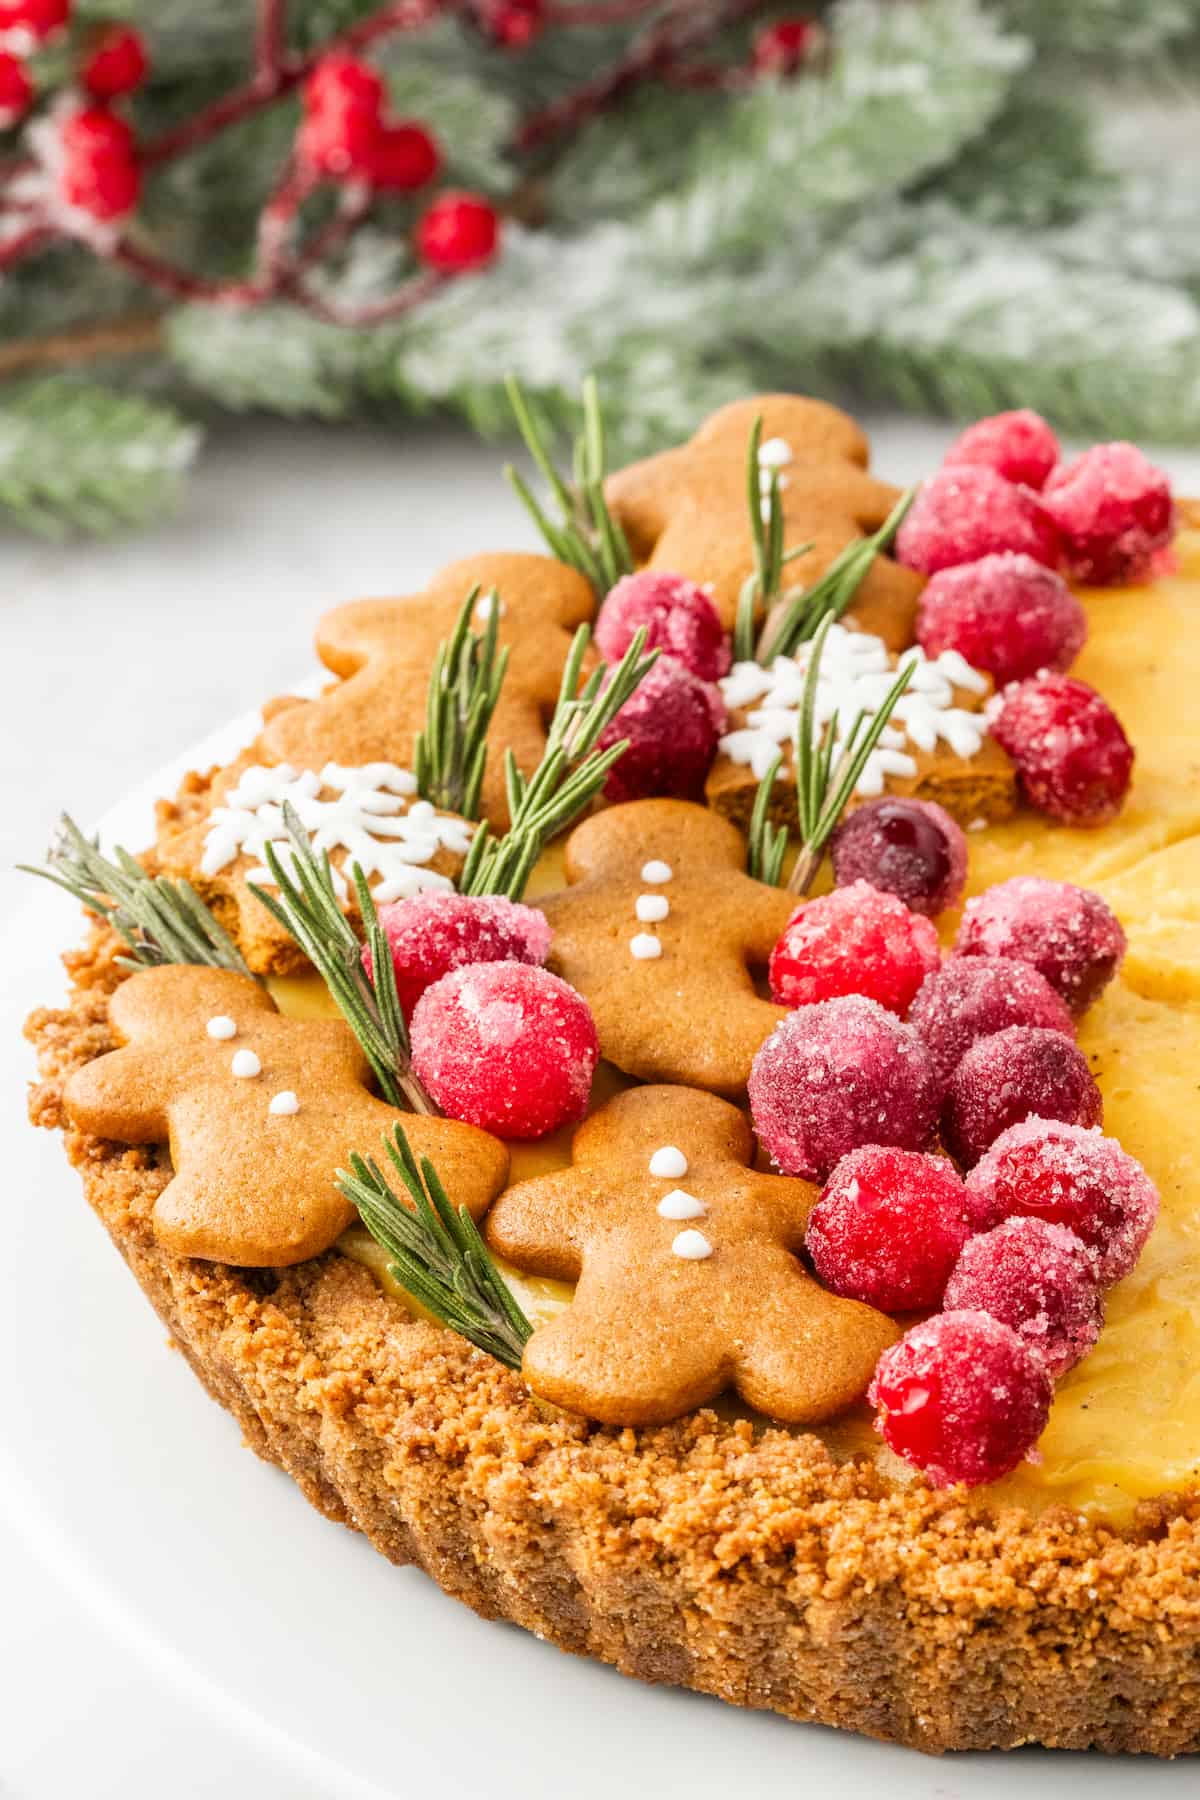 Gingerbread tart with cranberries and rosemary on a white plate.